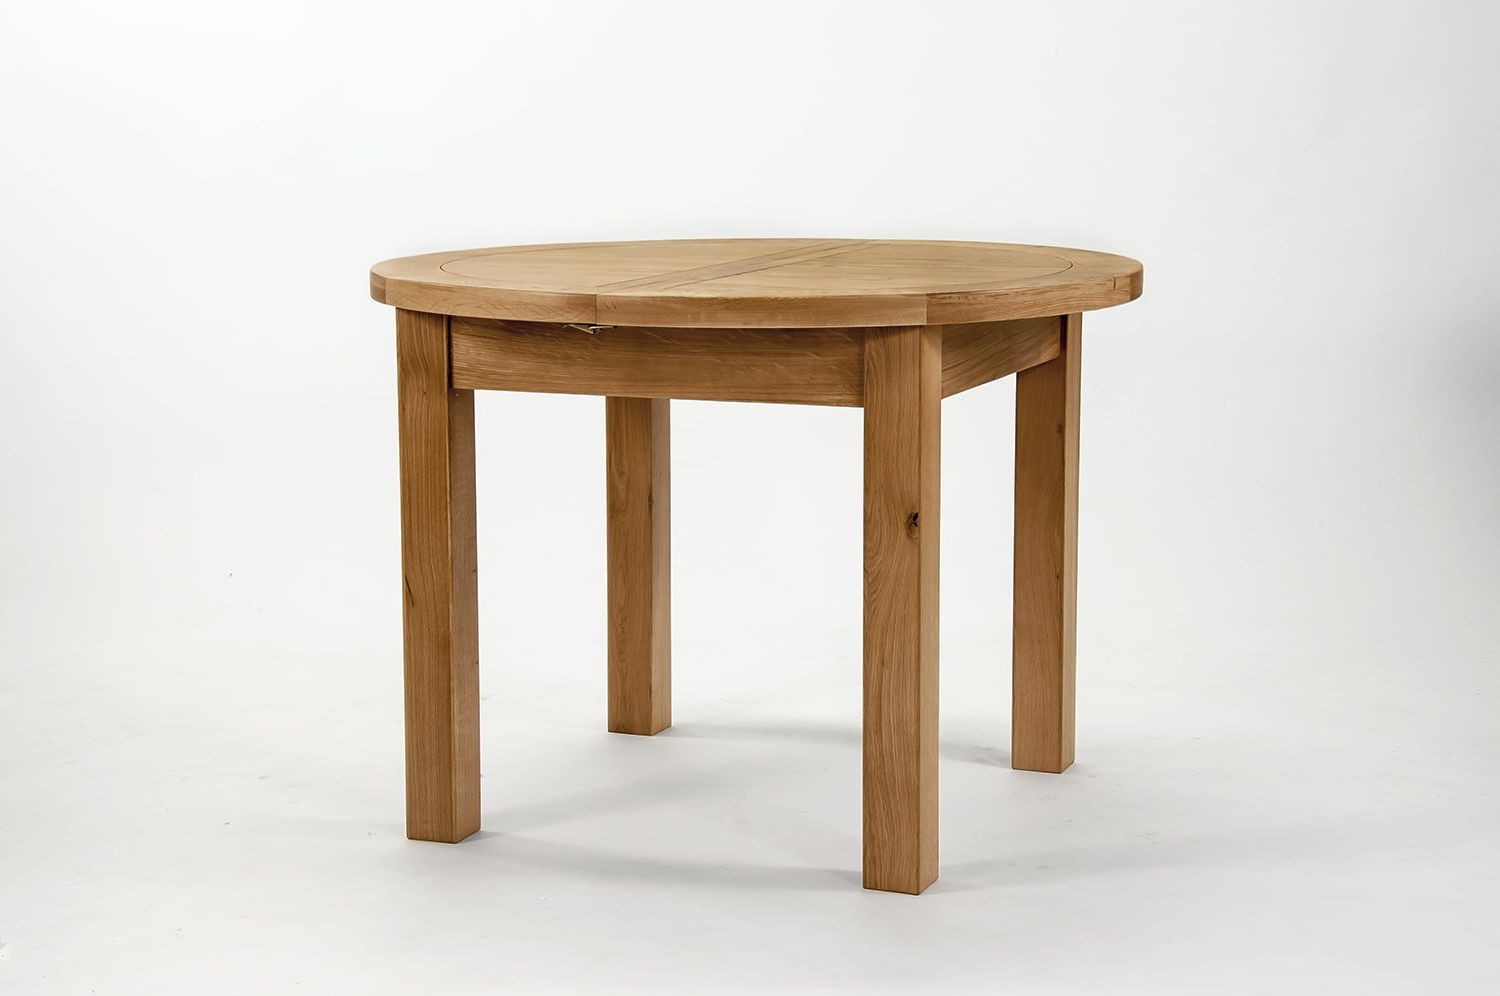 Most Popular Normandy Extending Dining Tables With Devon Oak Round Extending Dining Table: Amazon.co (View 12 of 25)